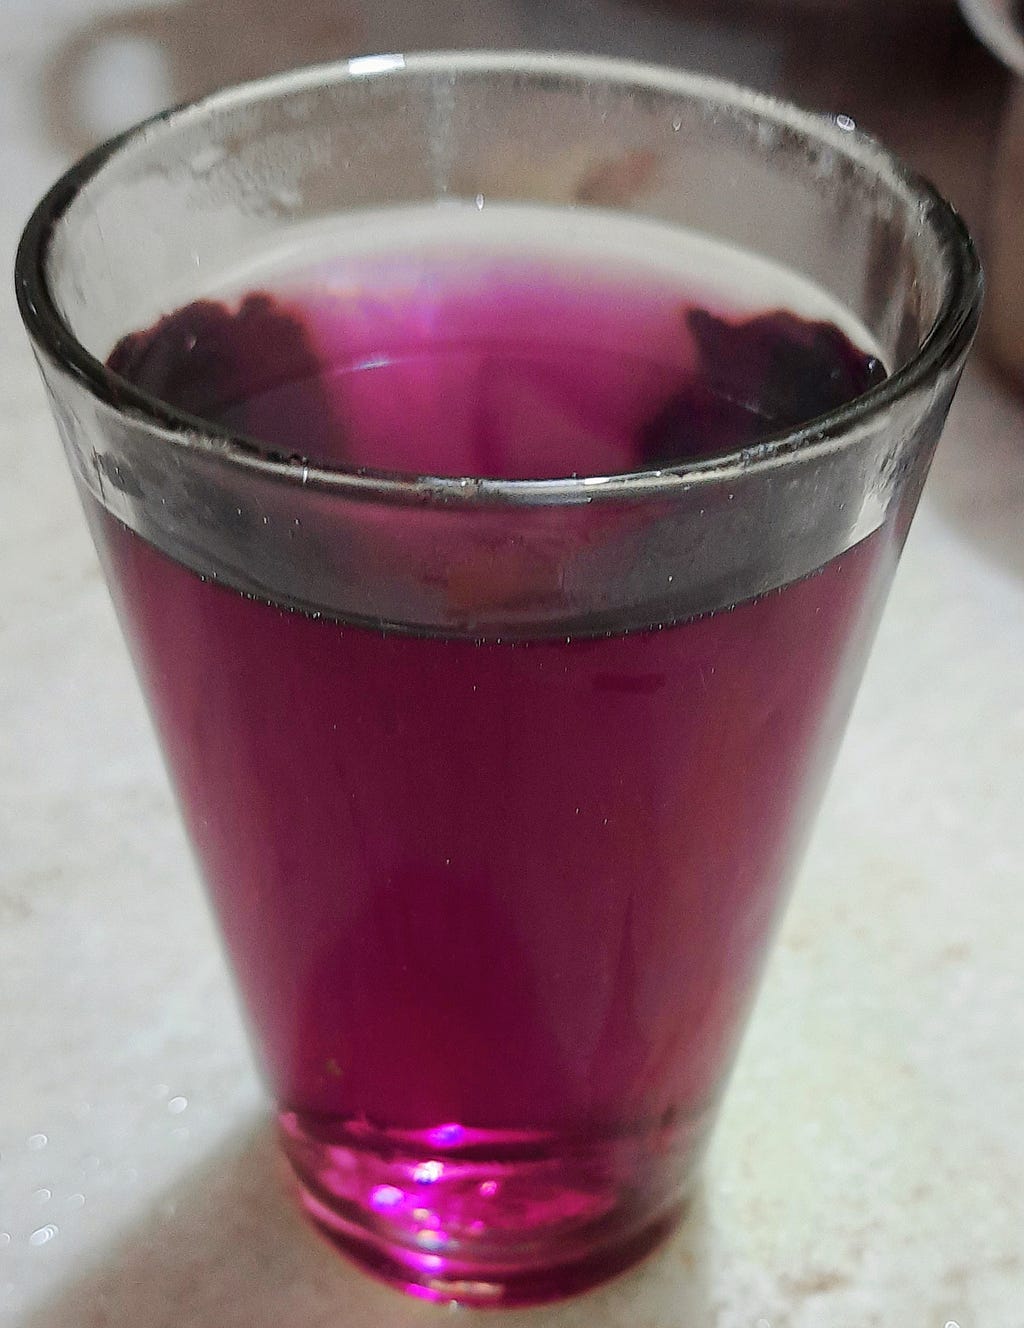 Hibiscus tisane in a glass